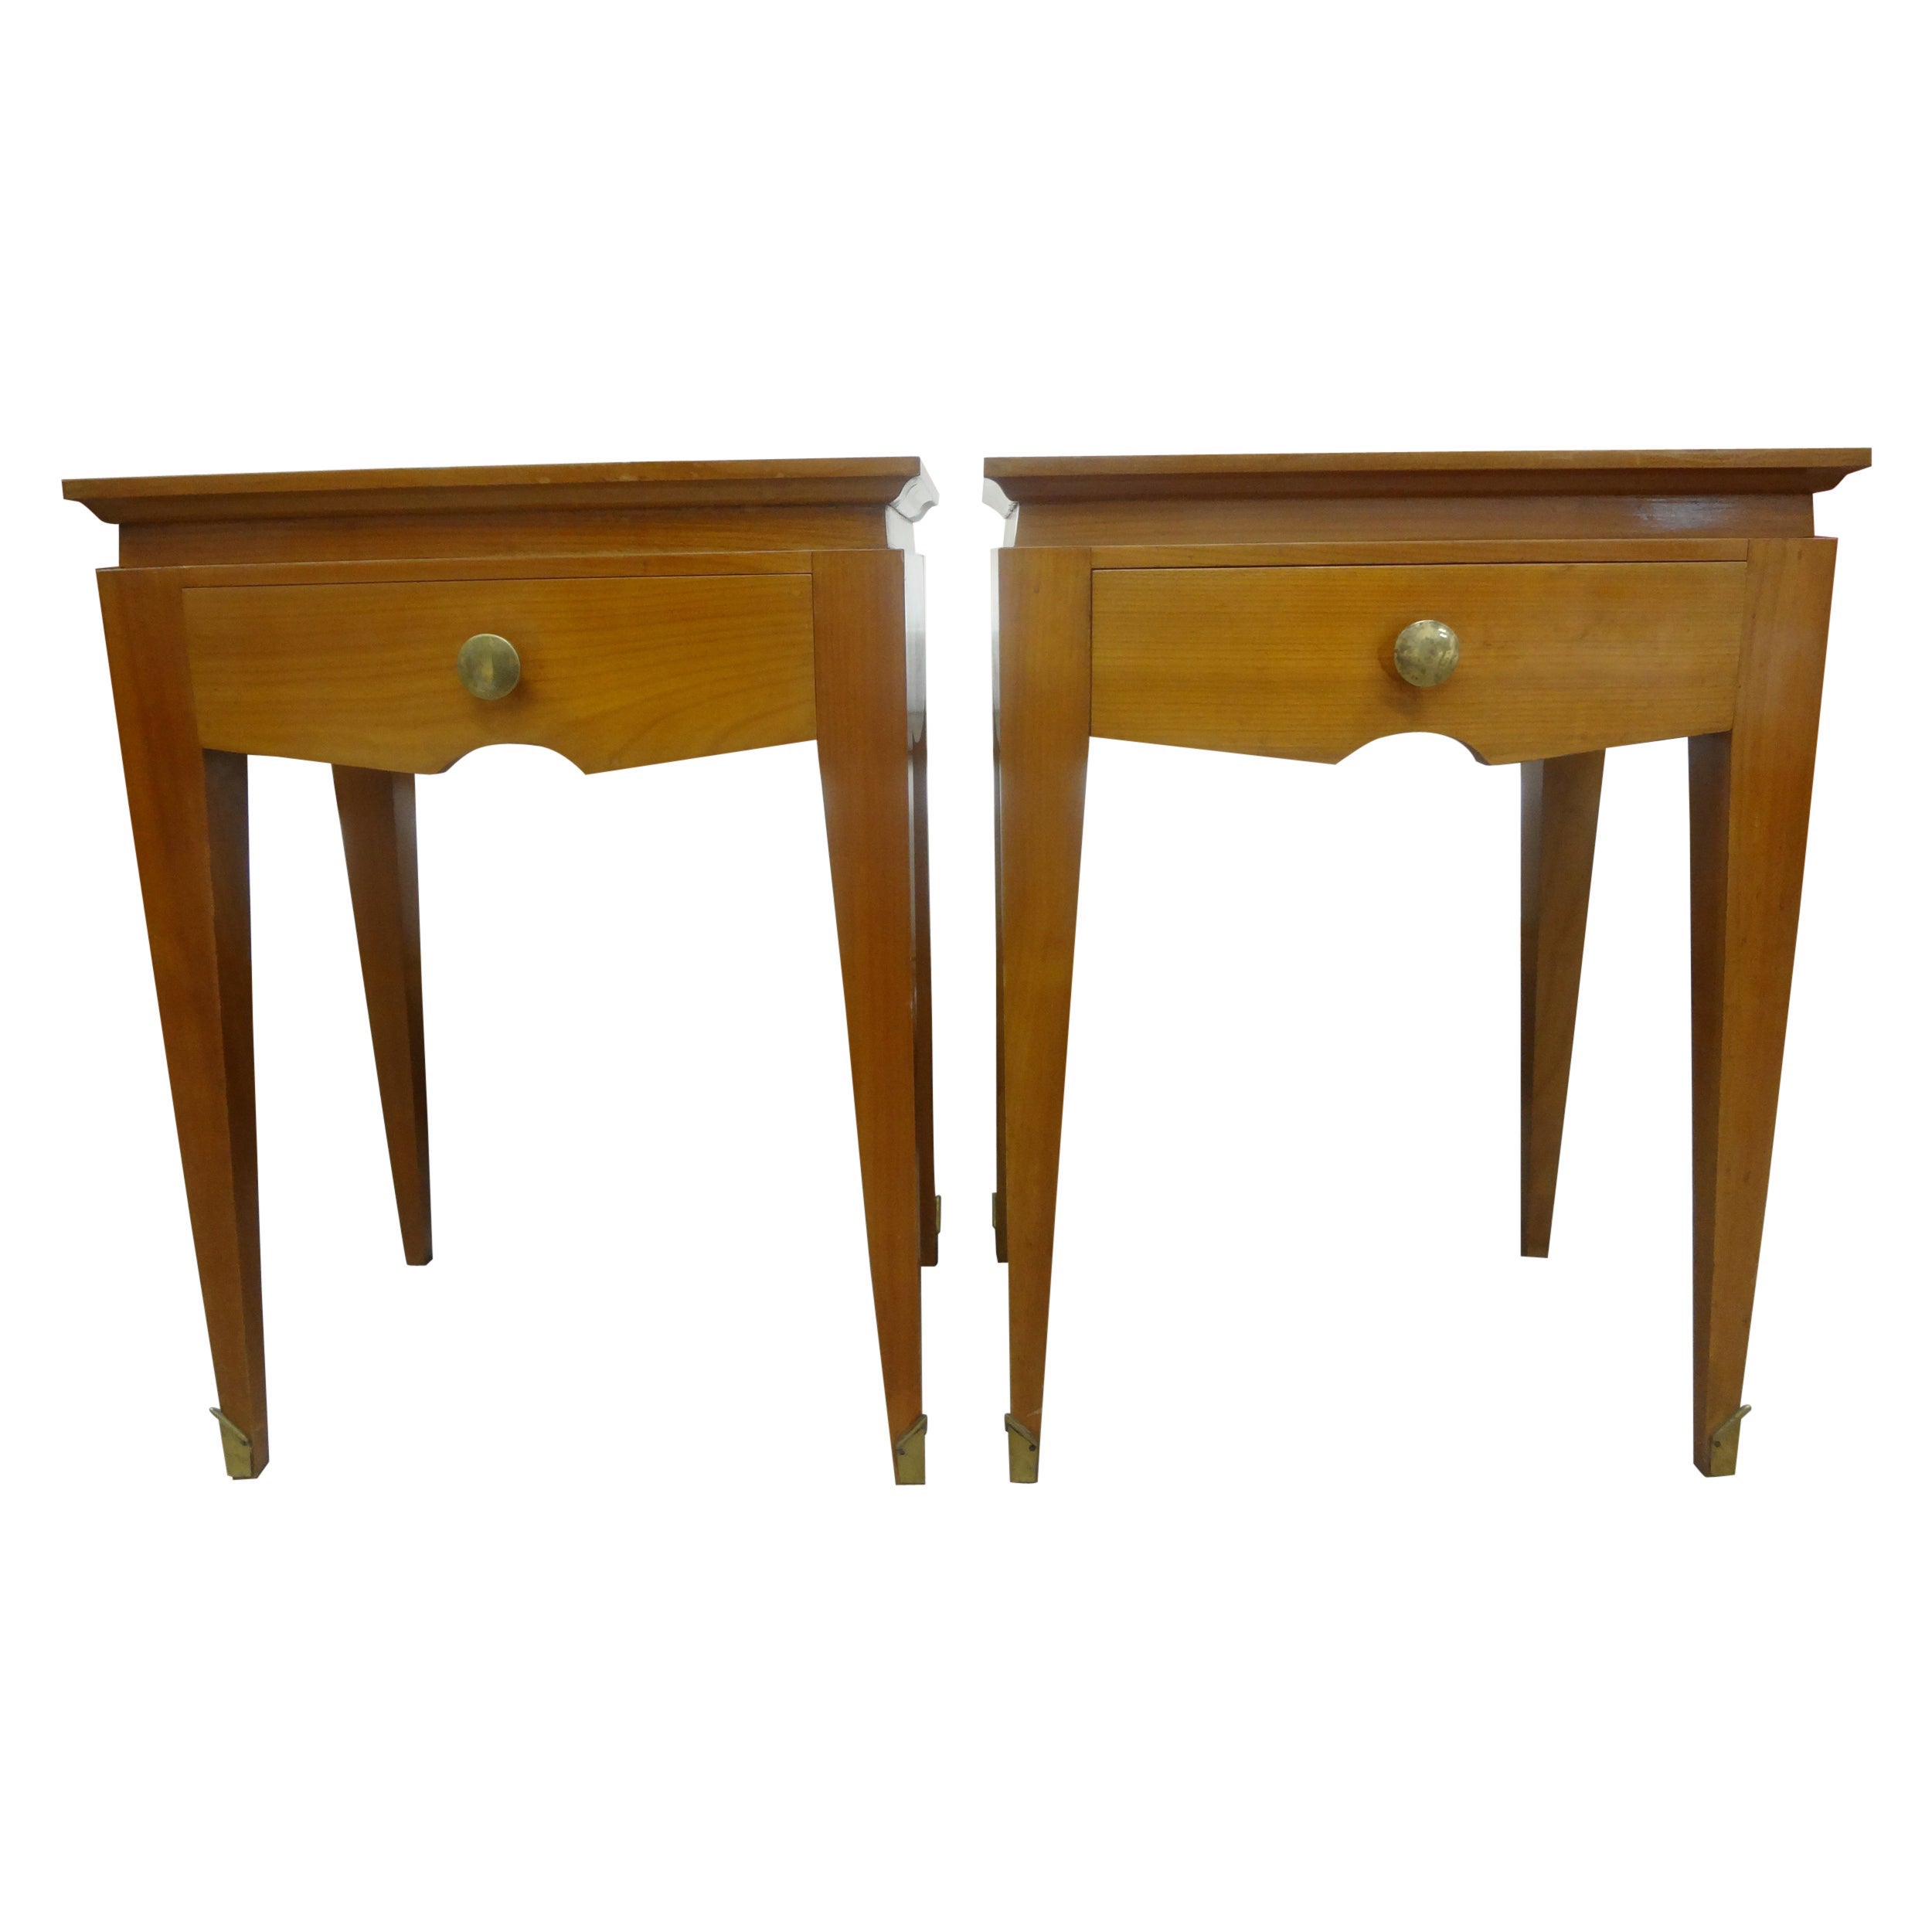 Pair of French Modern Nightstands or Tables by Jean Pascaud For Sale